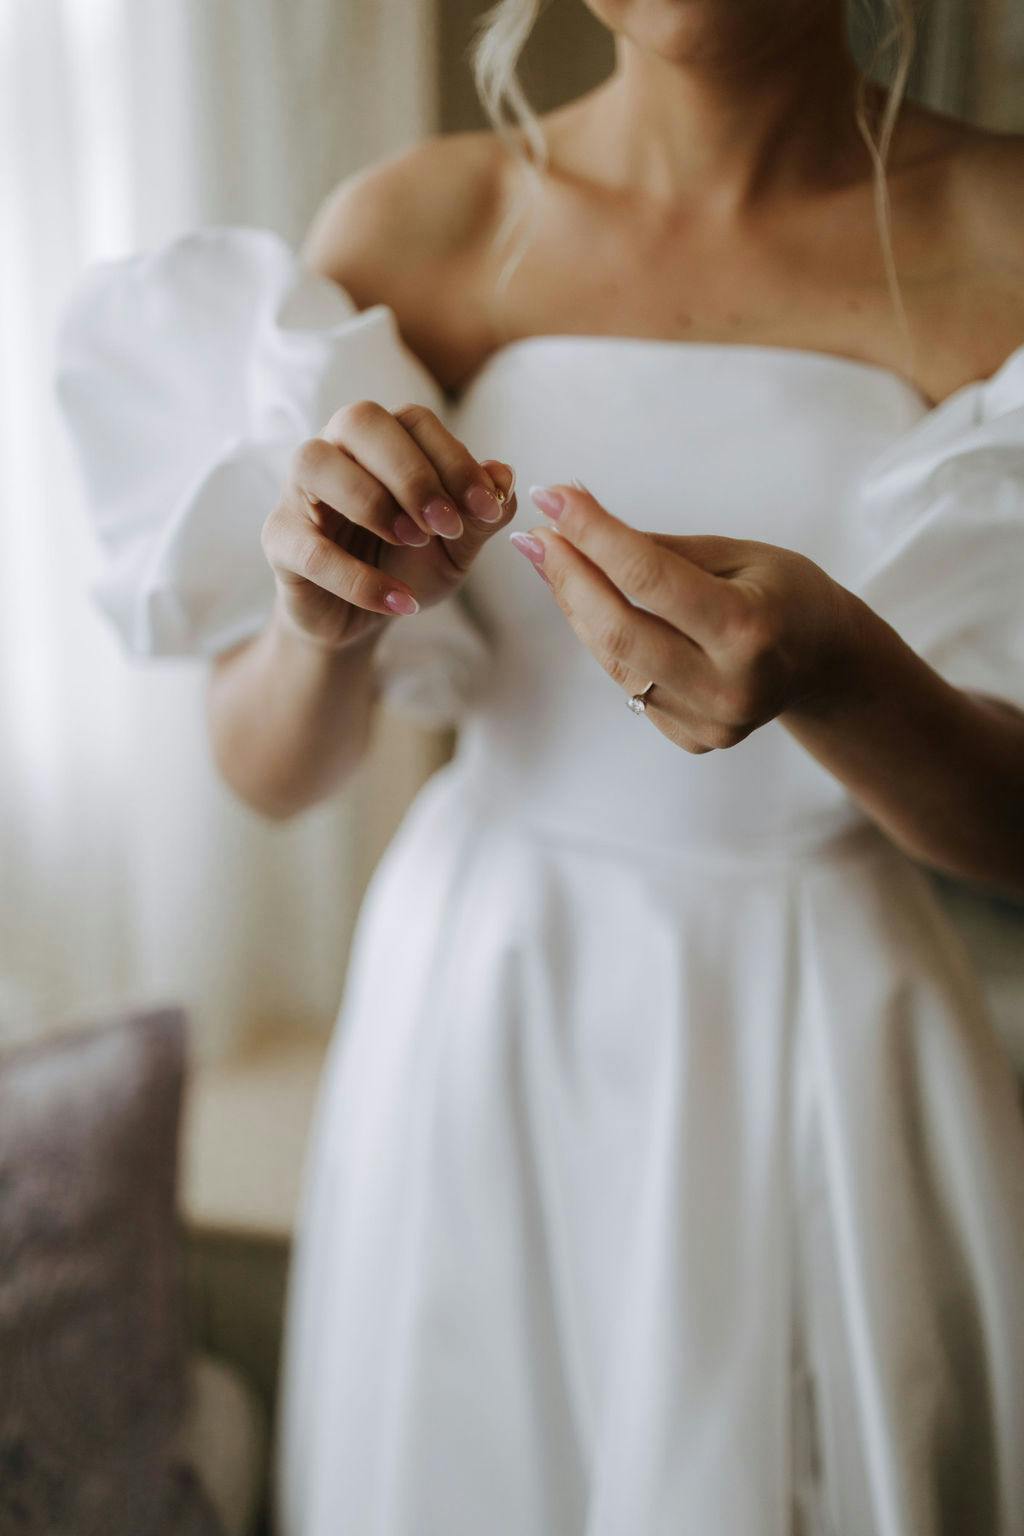 A bride in a white off-the-shoulder wedding dress with puffy sleeves is seen from the neck down. She is holding a ring in her hands, and there's a glimpse of a wedding ring on her finger. The background shows a softly lit room with a curtain and a piece of furniture.